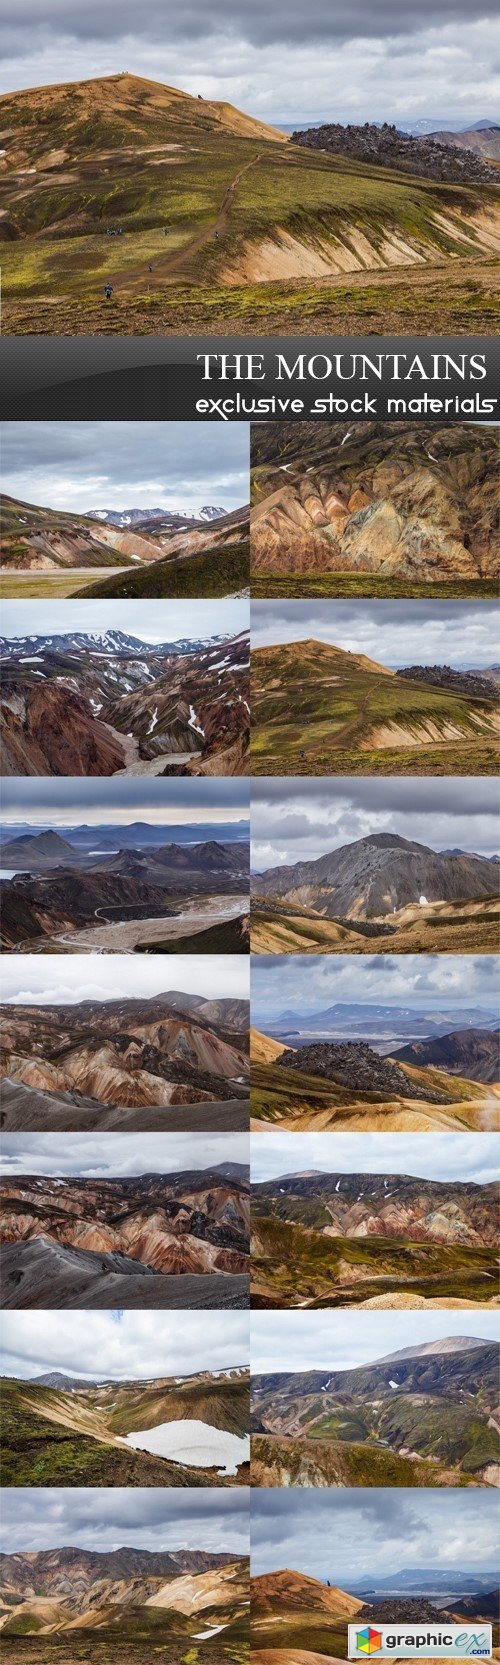 The Mountains Images - 14 UHQ JPEG